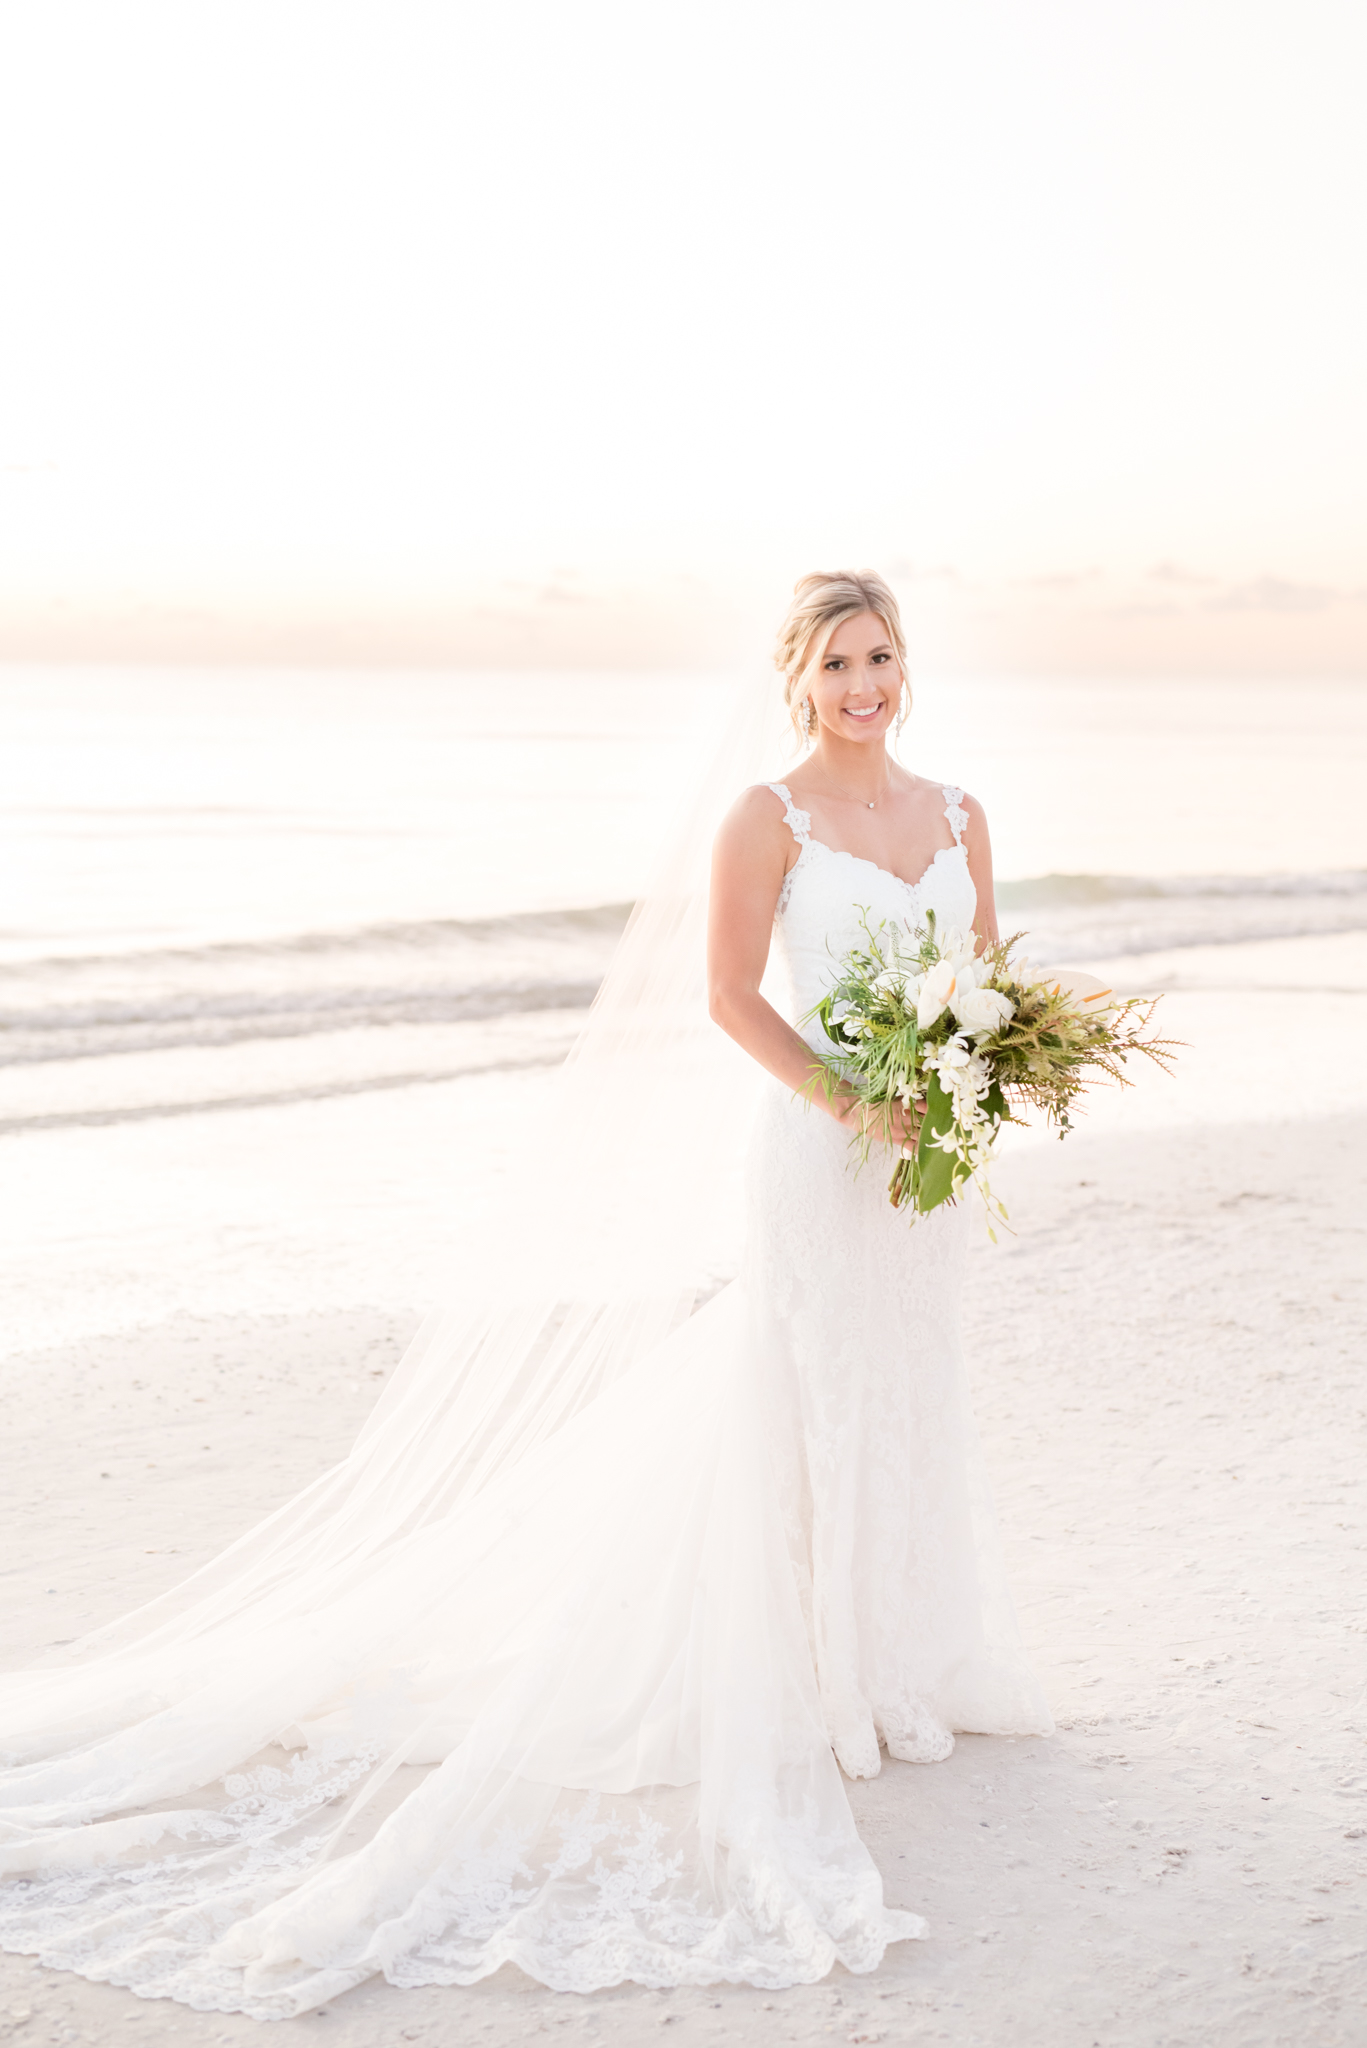 Bride poses and smiles on beach.